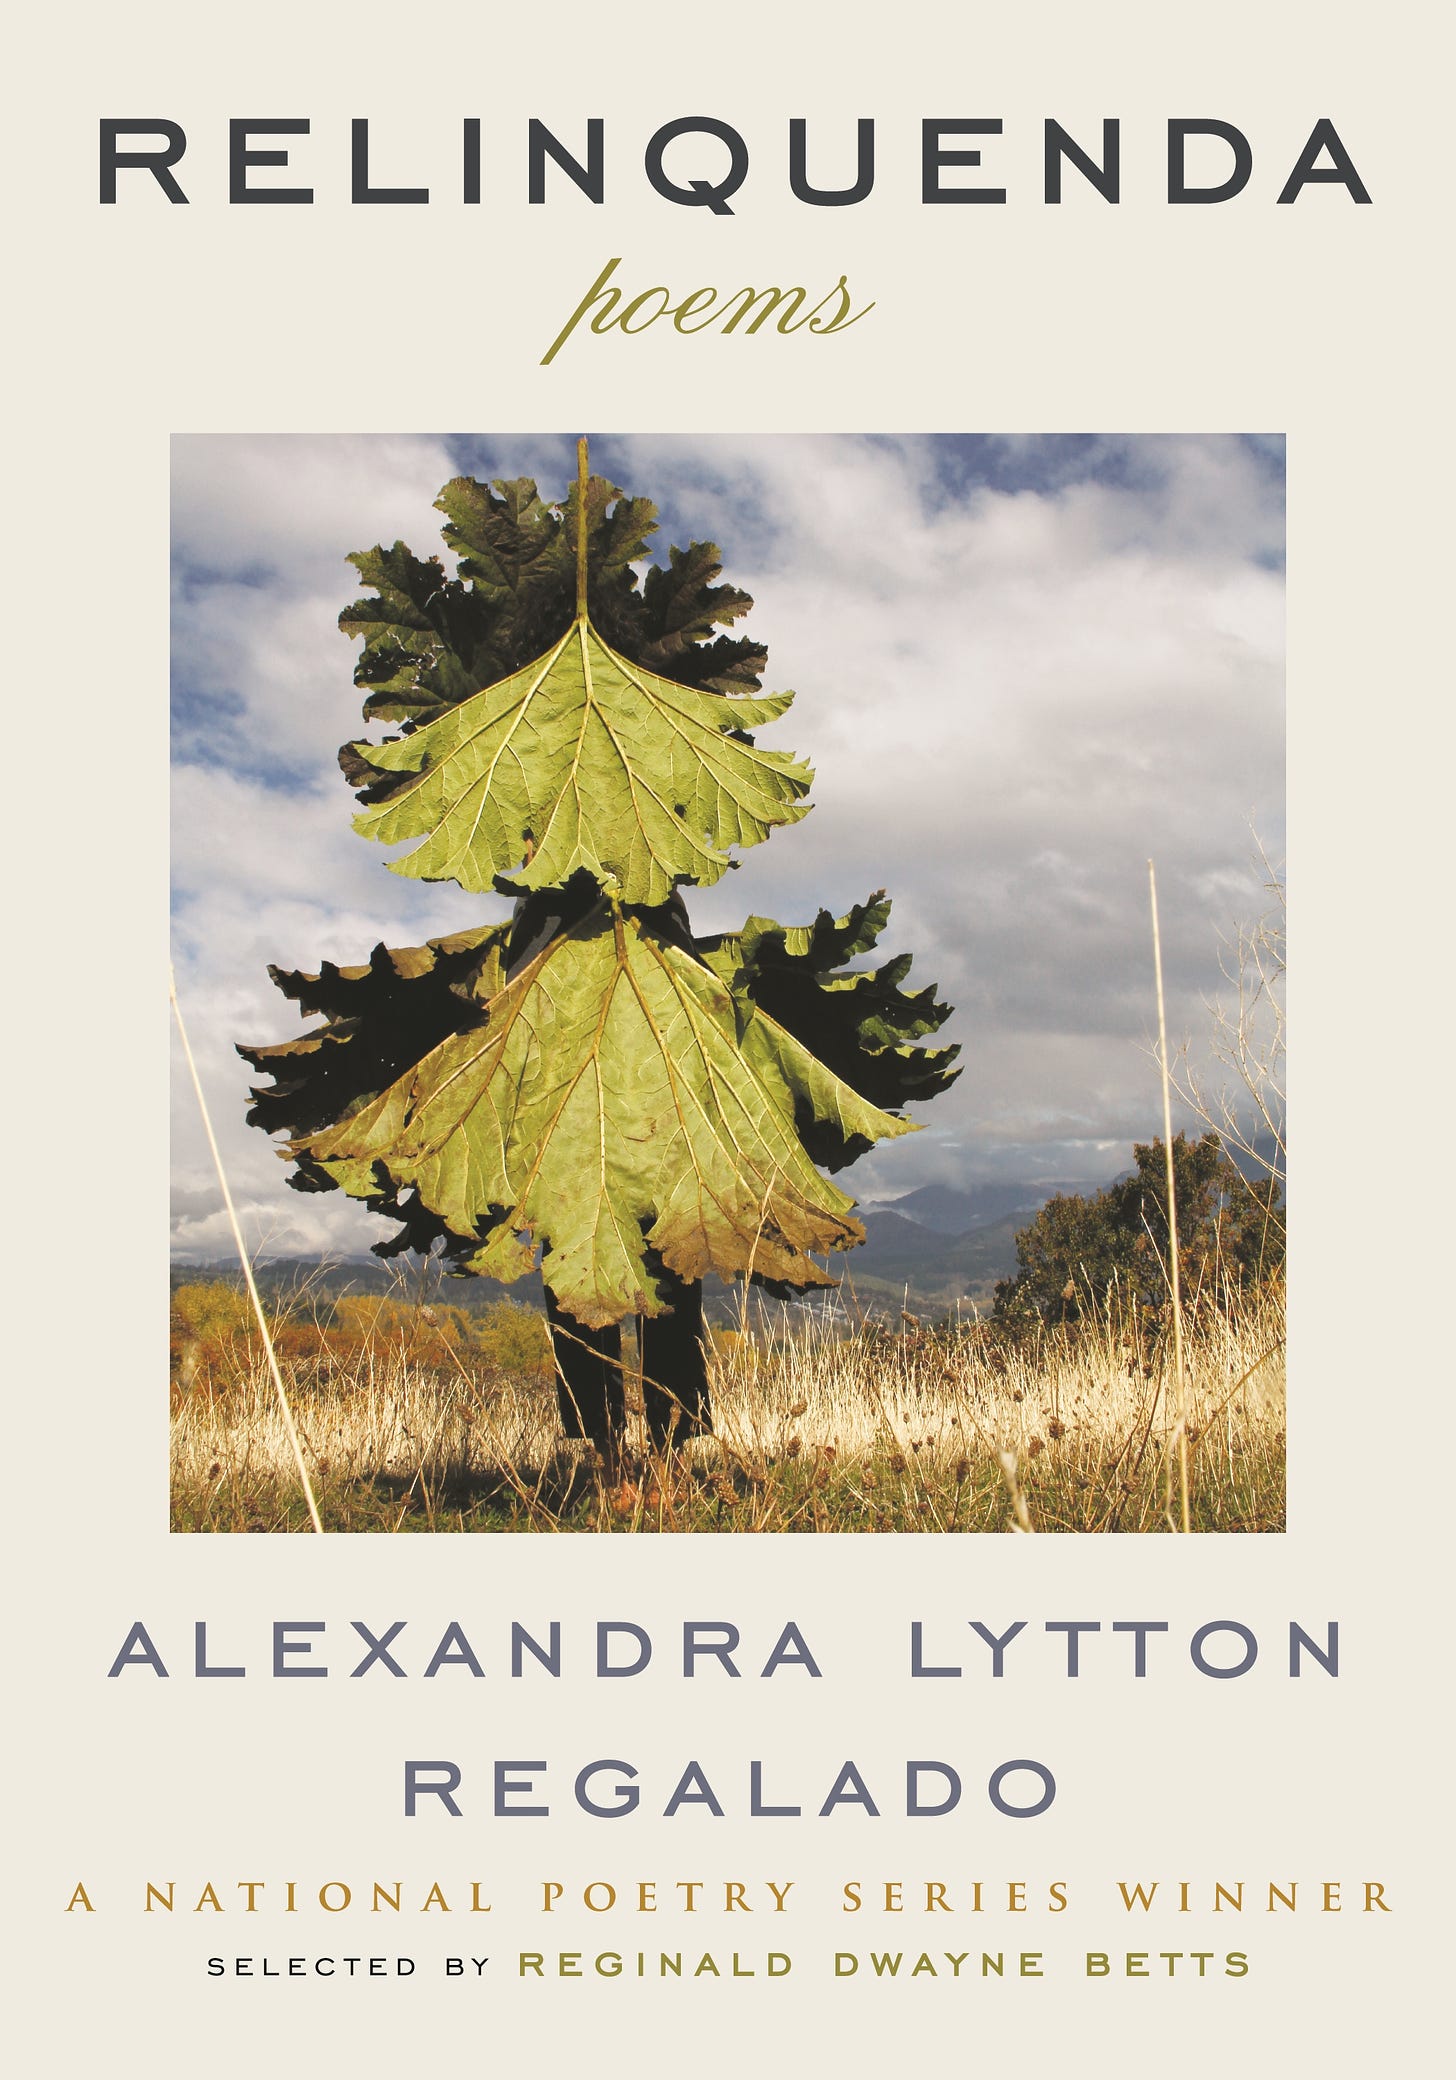 This is the cover for Reliquenda by Alexandra Lytton Regalado